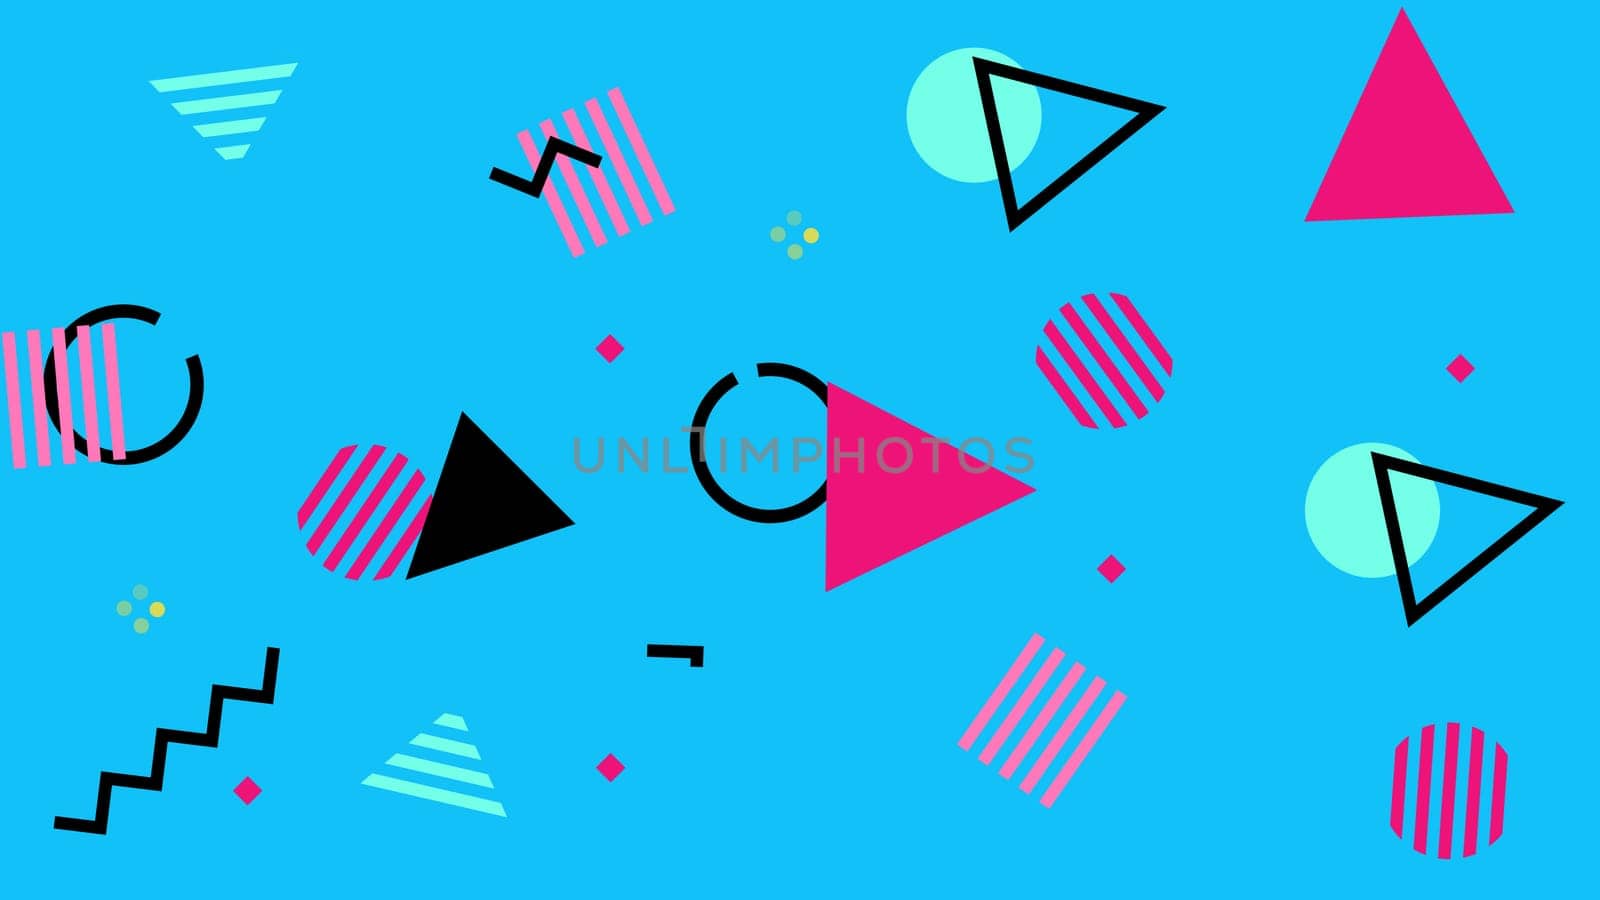 Geometric retro background pop art style with pink black shapes on blue composition. 80s and 90s.